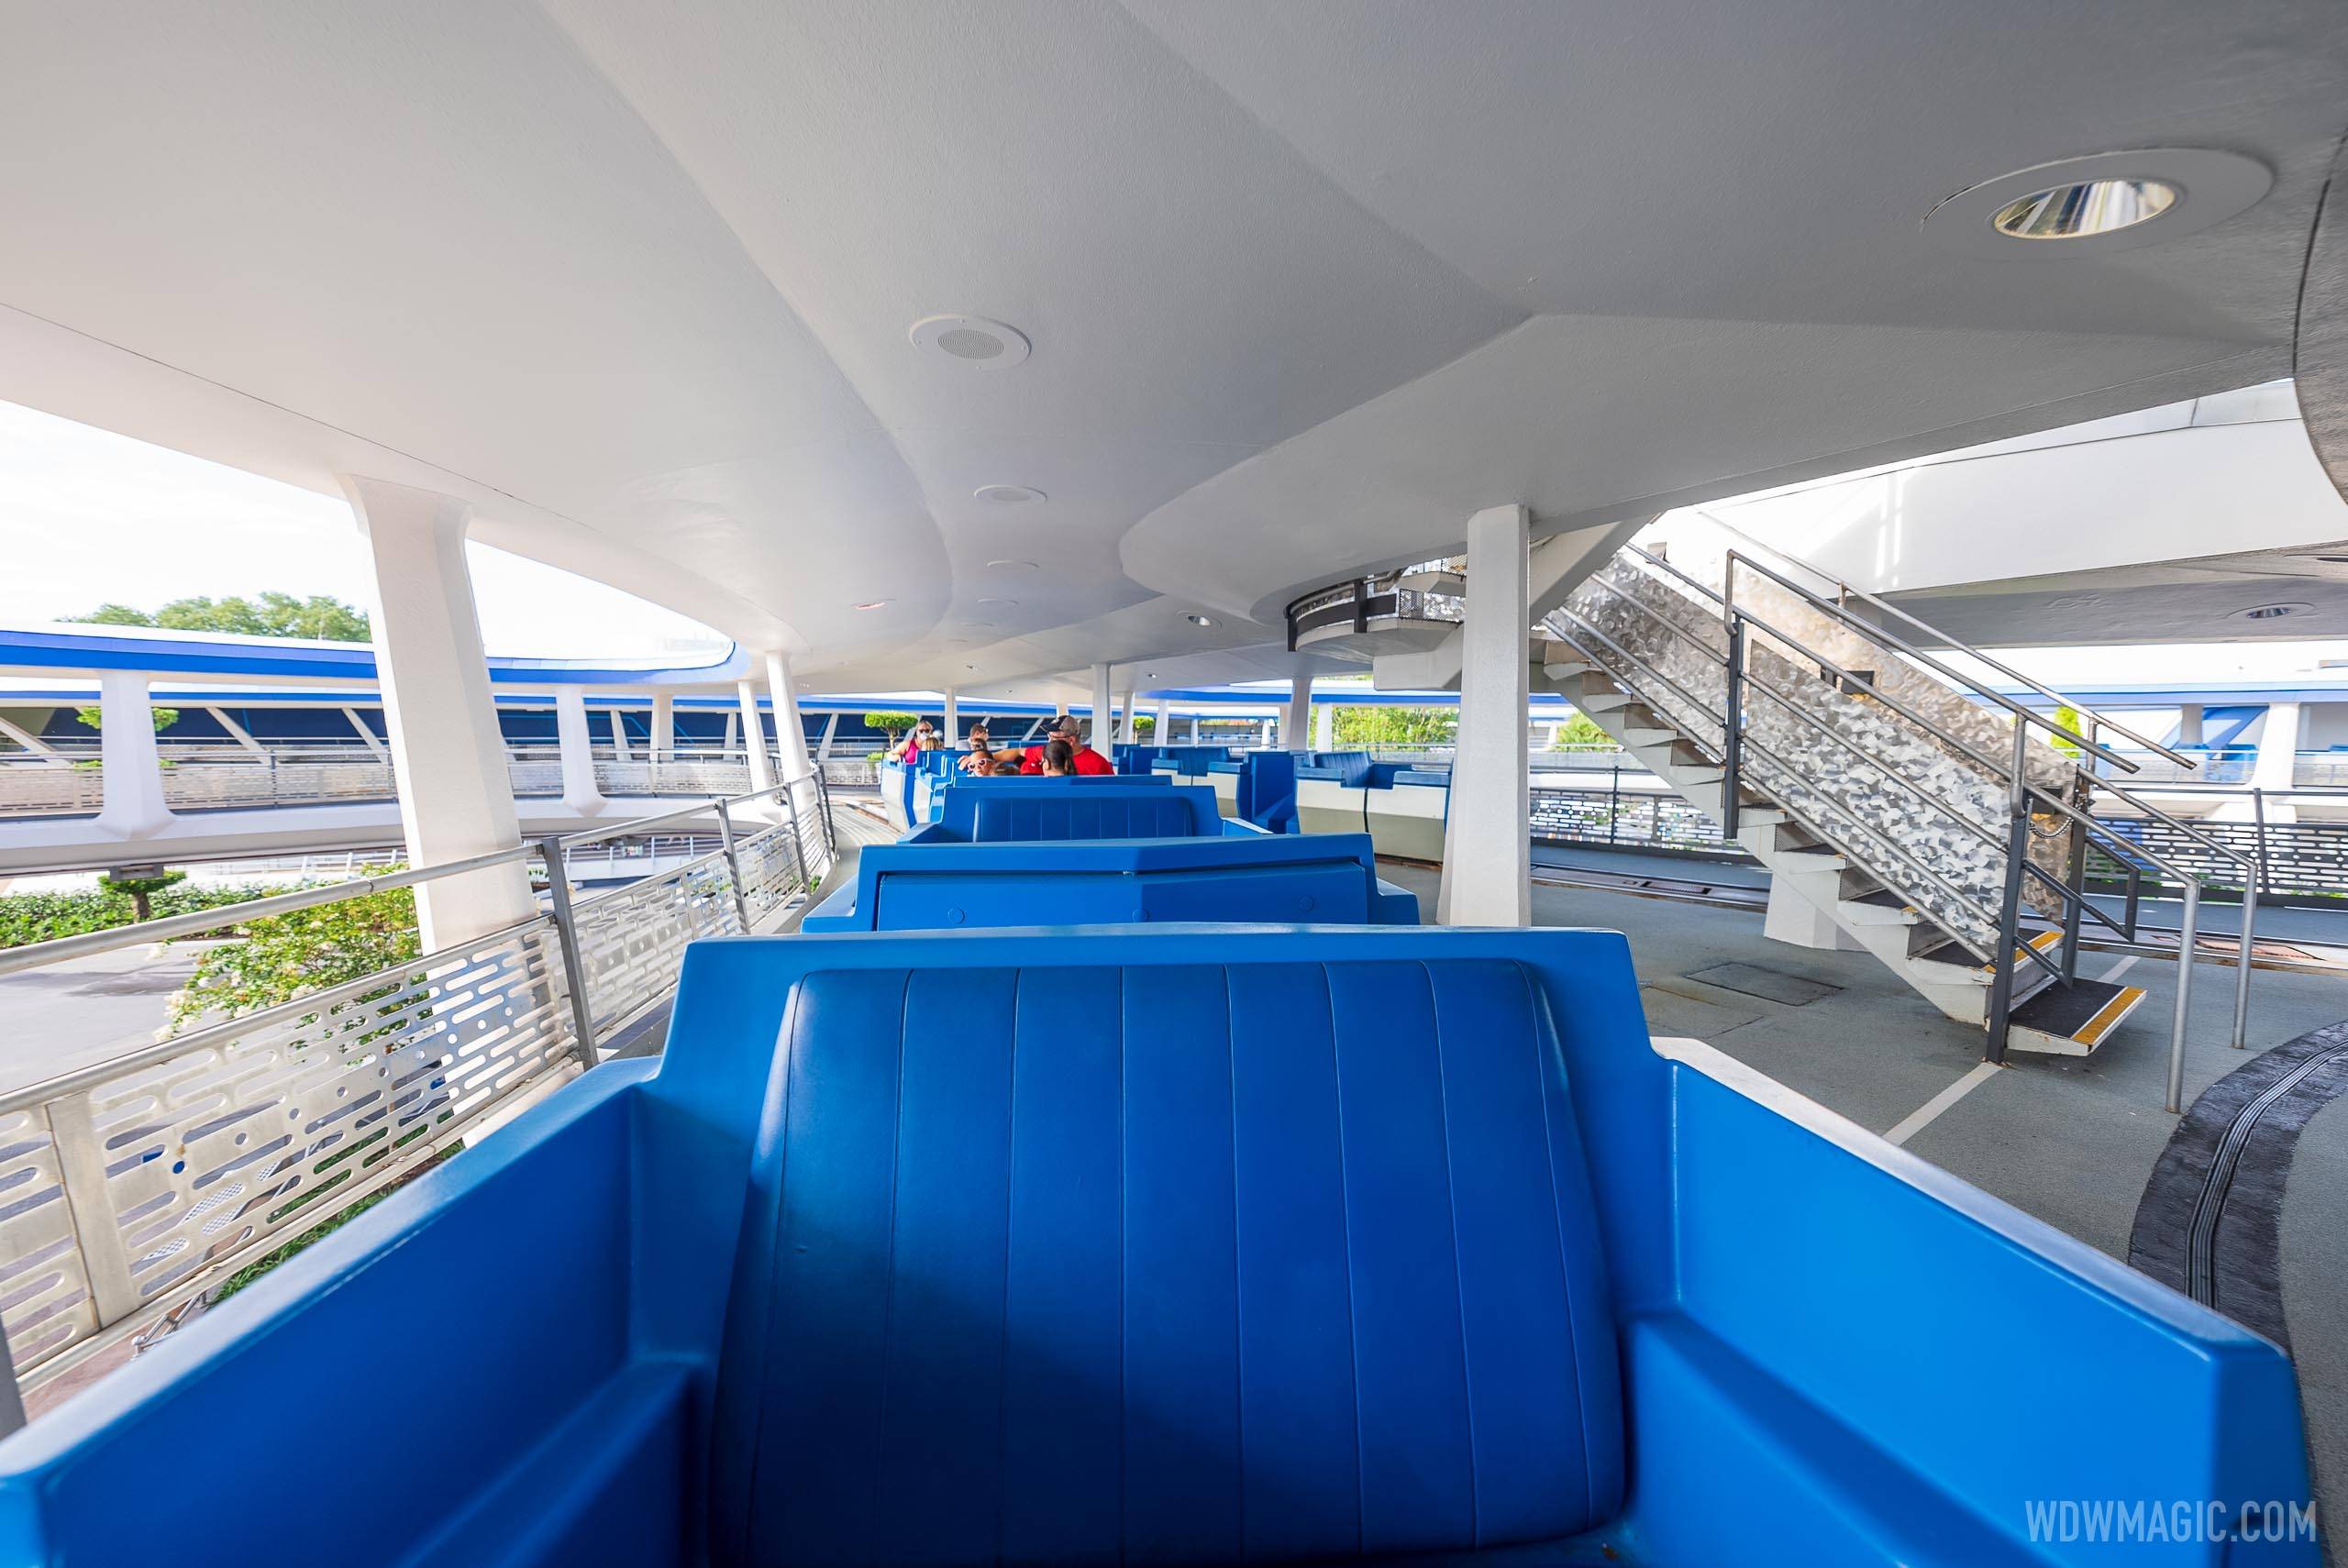 Tomorrowland Transit Authority PeopleMover closing for a near two month refurbishment